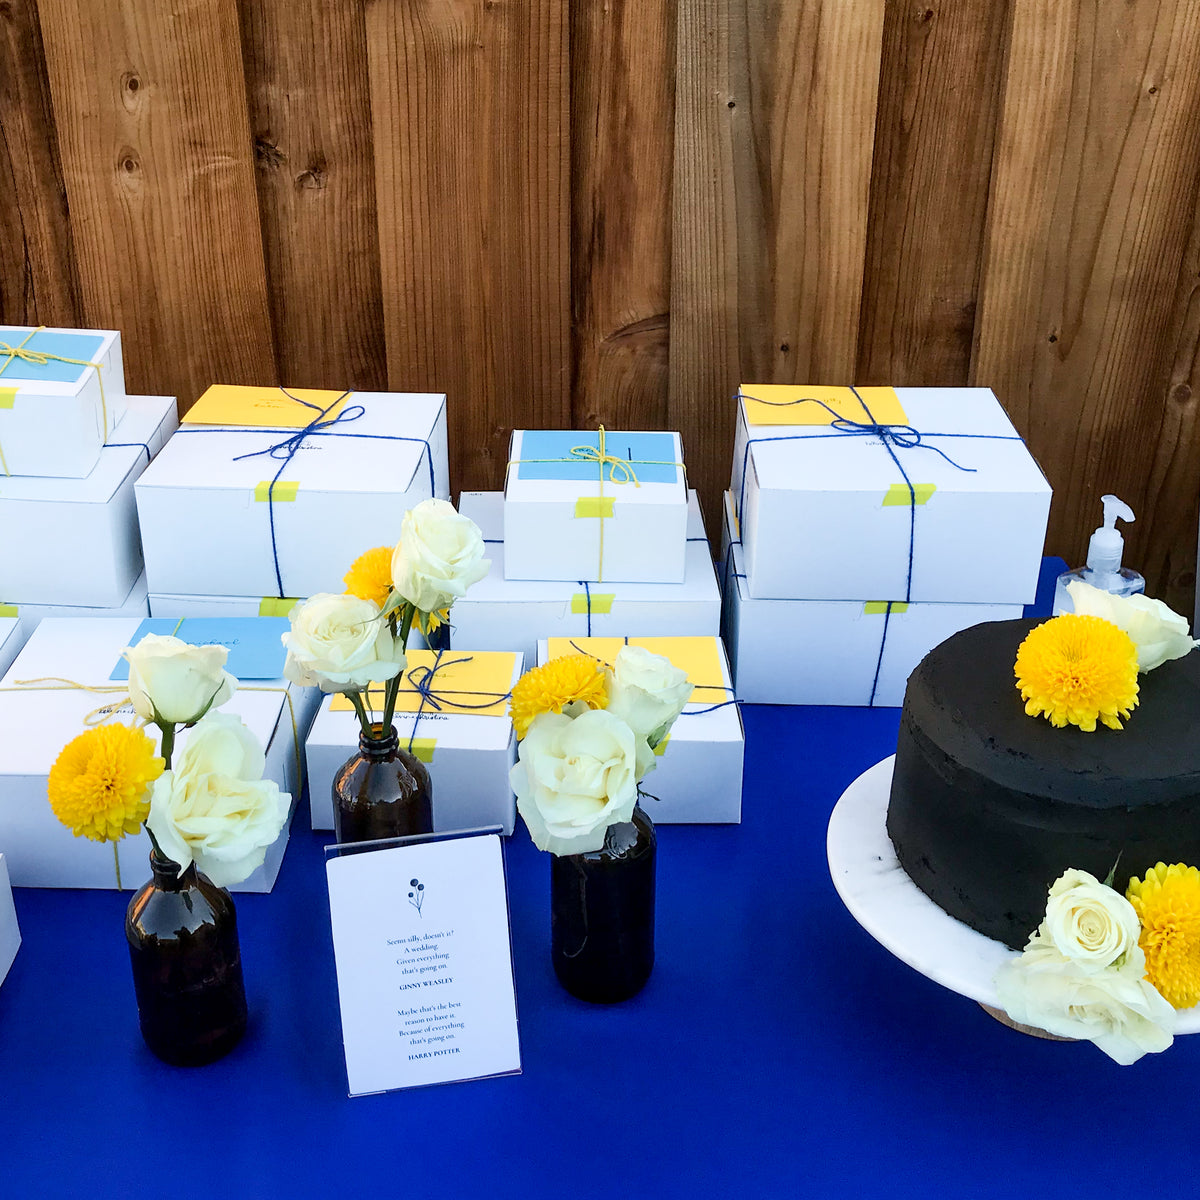 blue tablecloth covers a table with a black cake, flowers, and boxes of cookies wrapped in twine